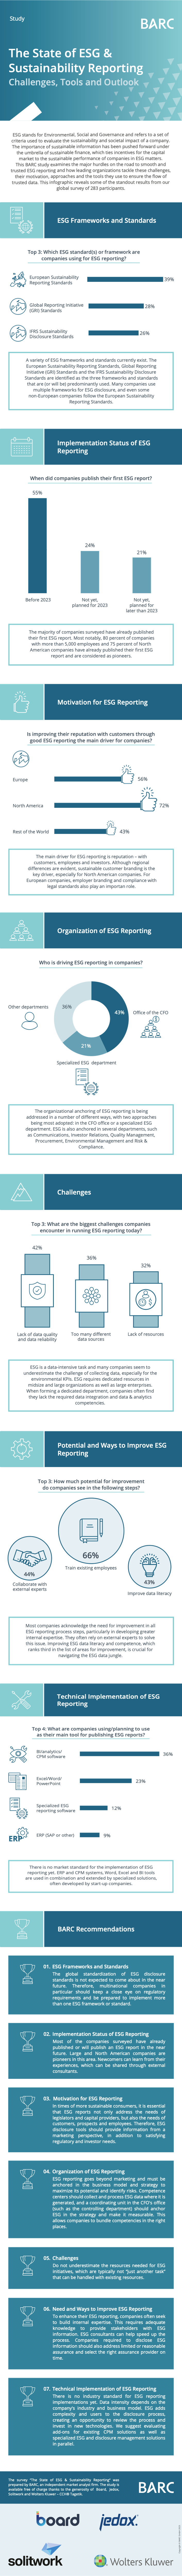 ESG and Sustainability Reporting infographic